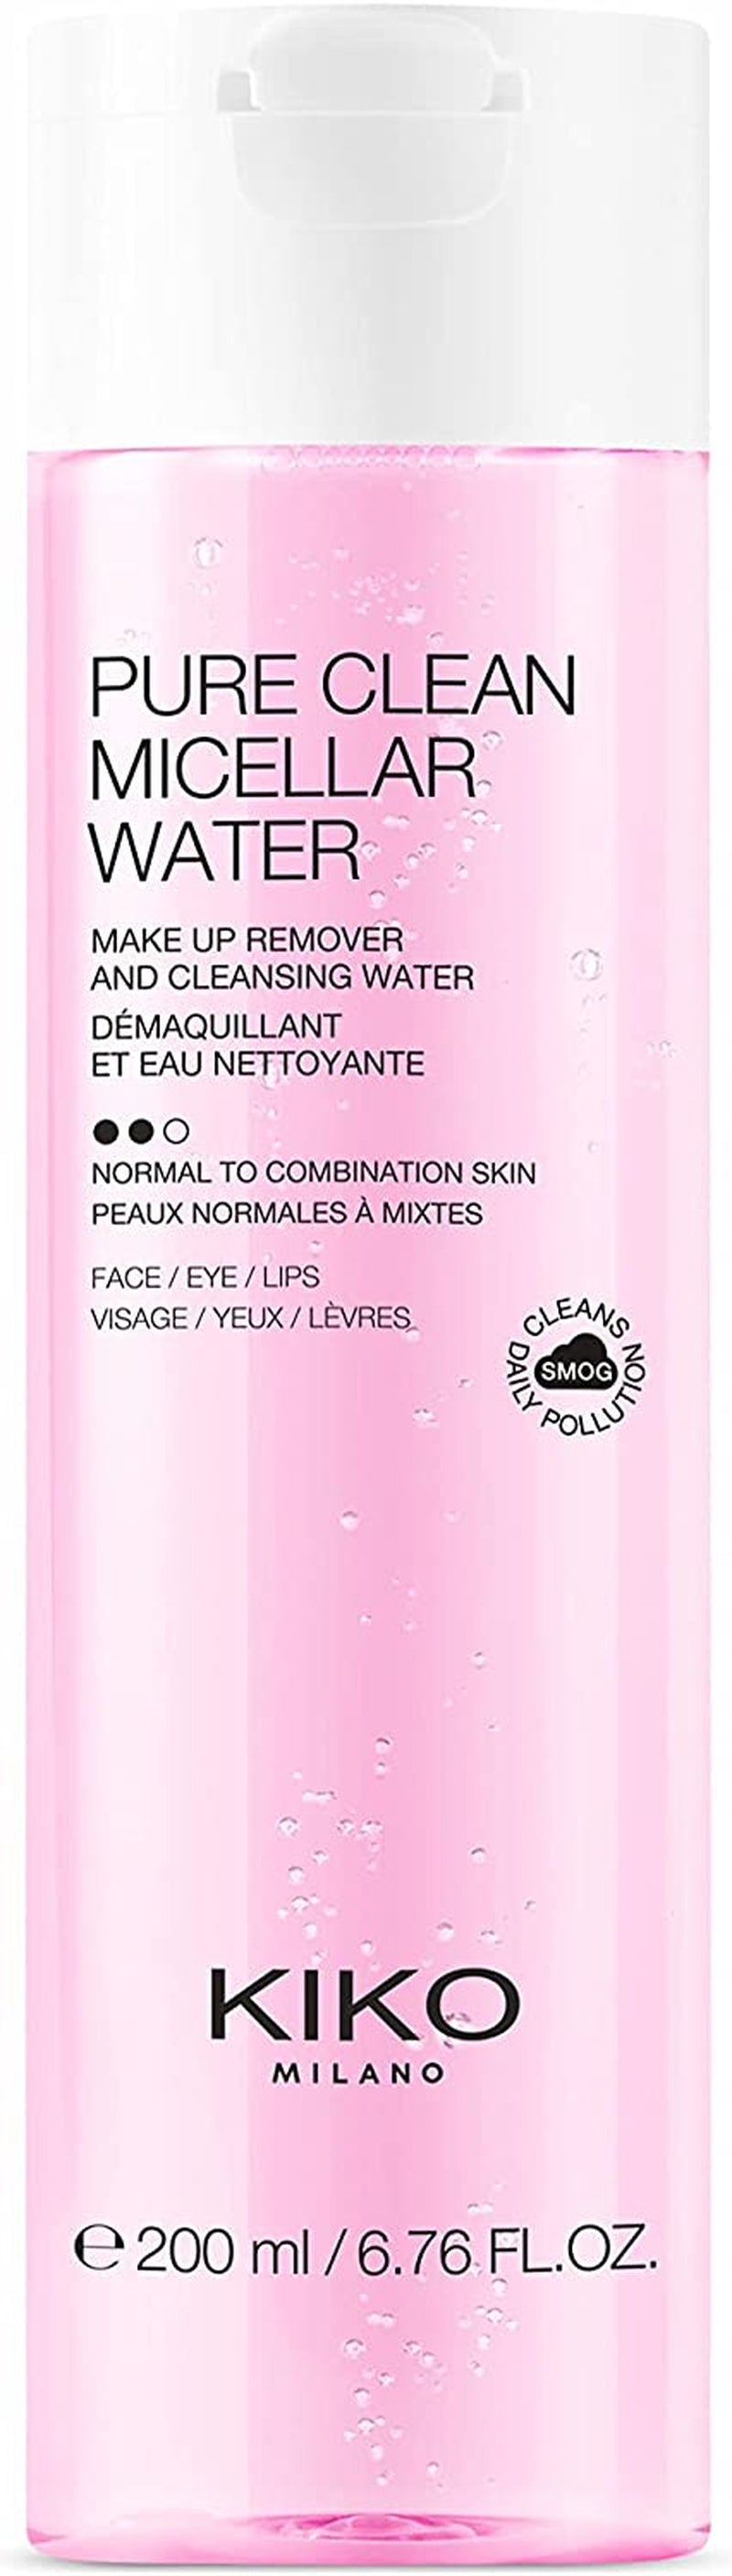 KIKO Milano Micellar Makeup Removal Water for Your Face, Eye Contours and Lips - Normal to Combination Skin